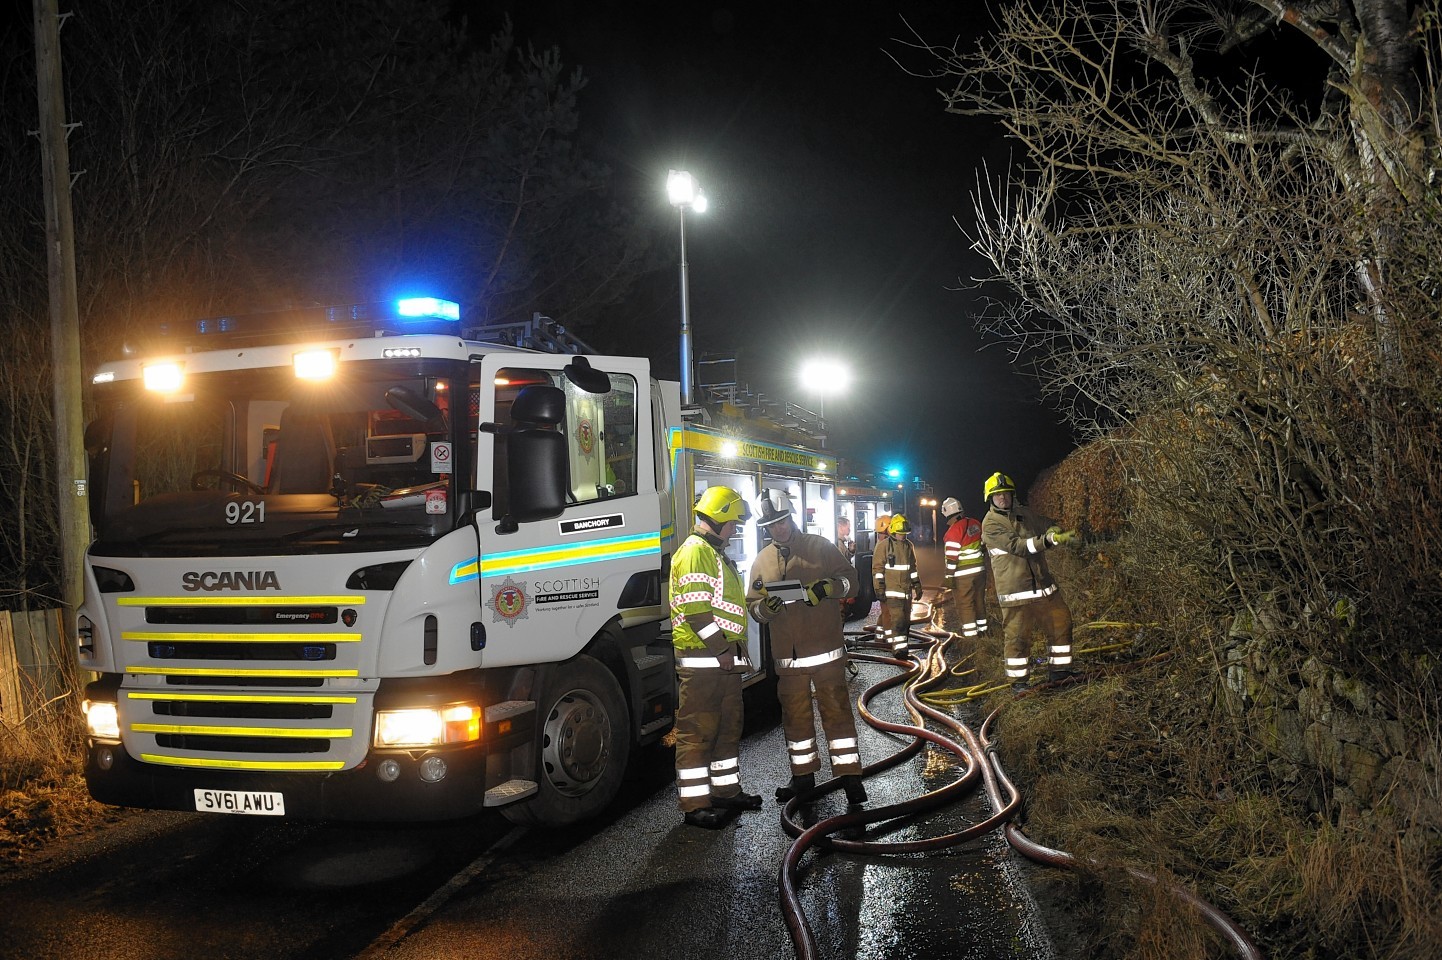 Firefighters spent almost two hours bringing the blaze under control